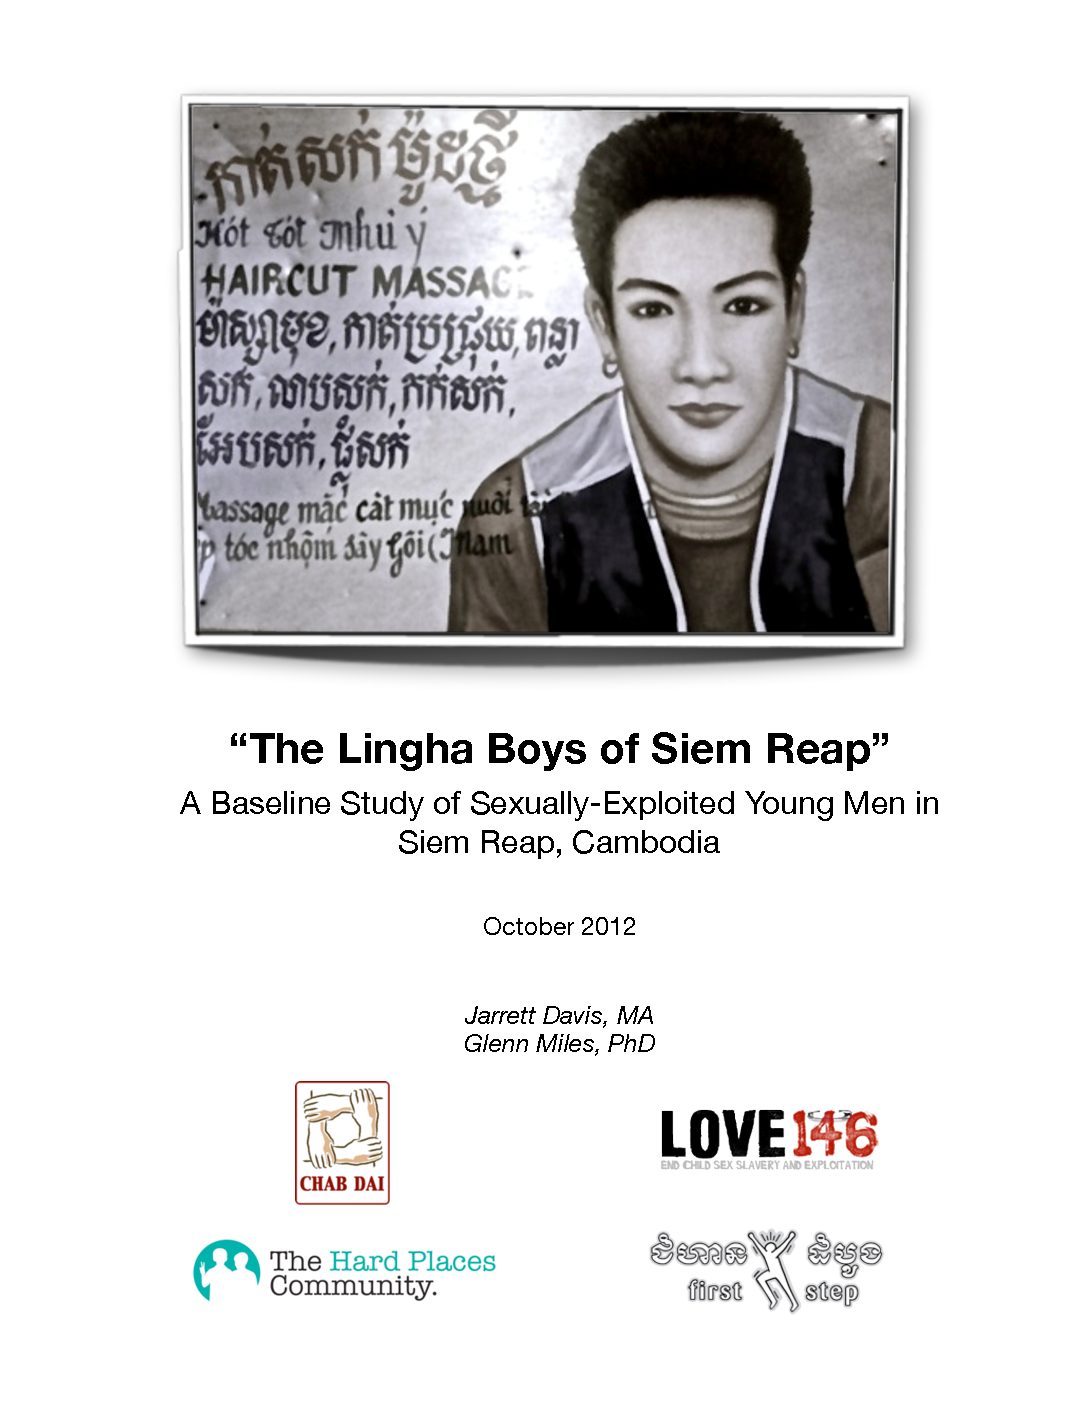 “The Lingha Boys of Siem Reap” A Baseline Study of Sexually-Exploited Young Men in Siem Reap, Cambodia